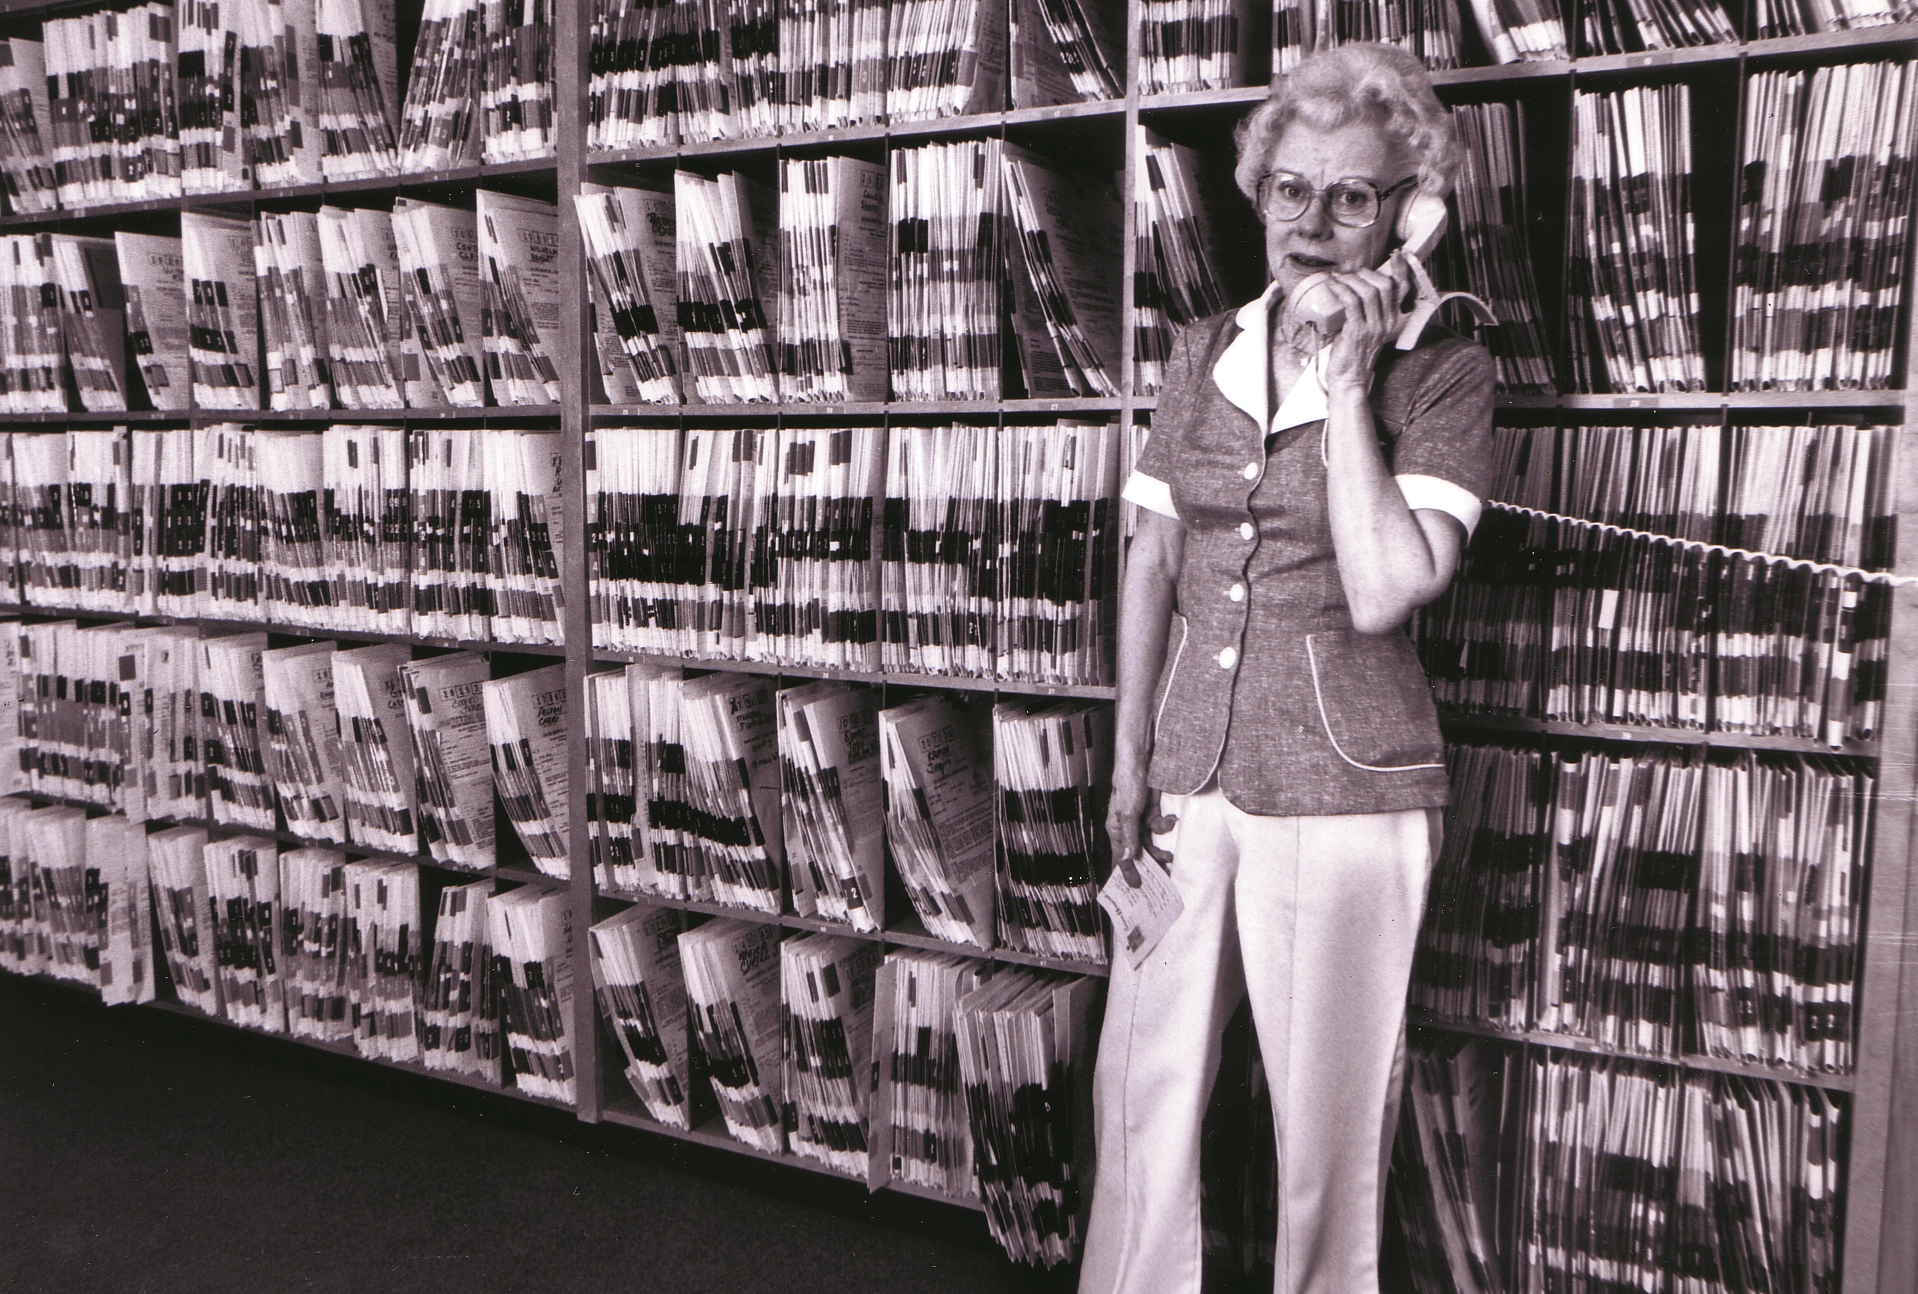 A nurse stands in front of a wall of medical records, 1982.